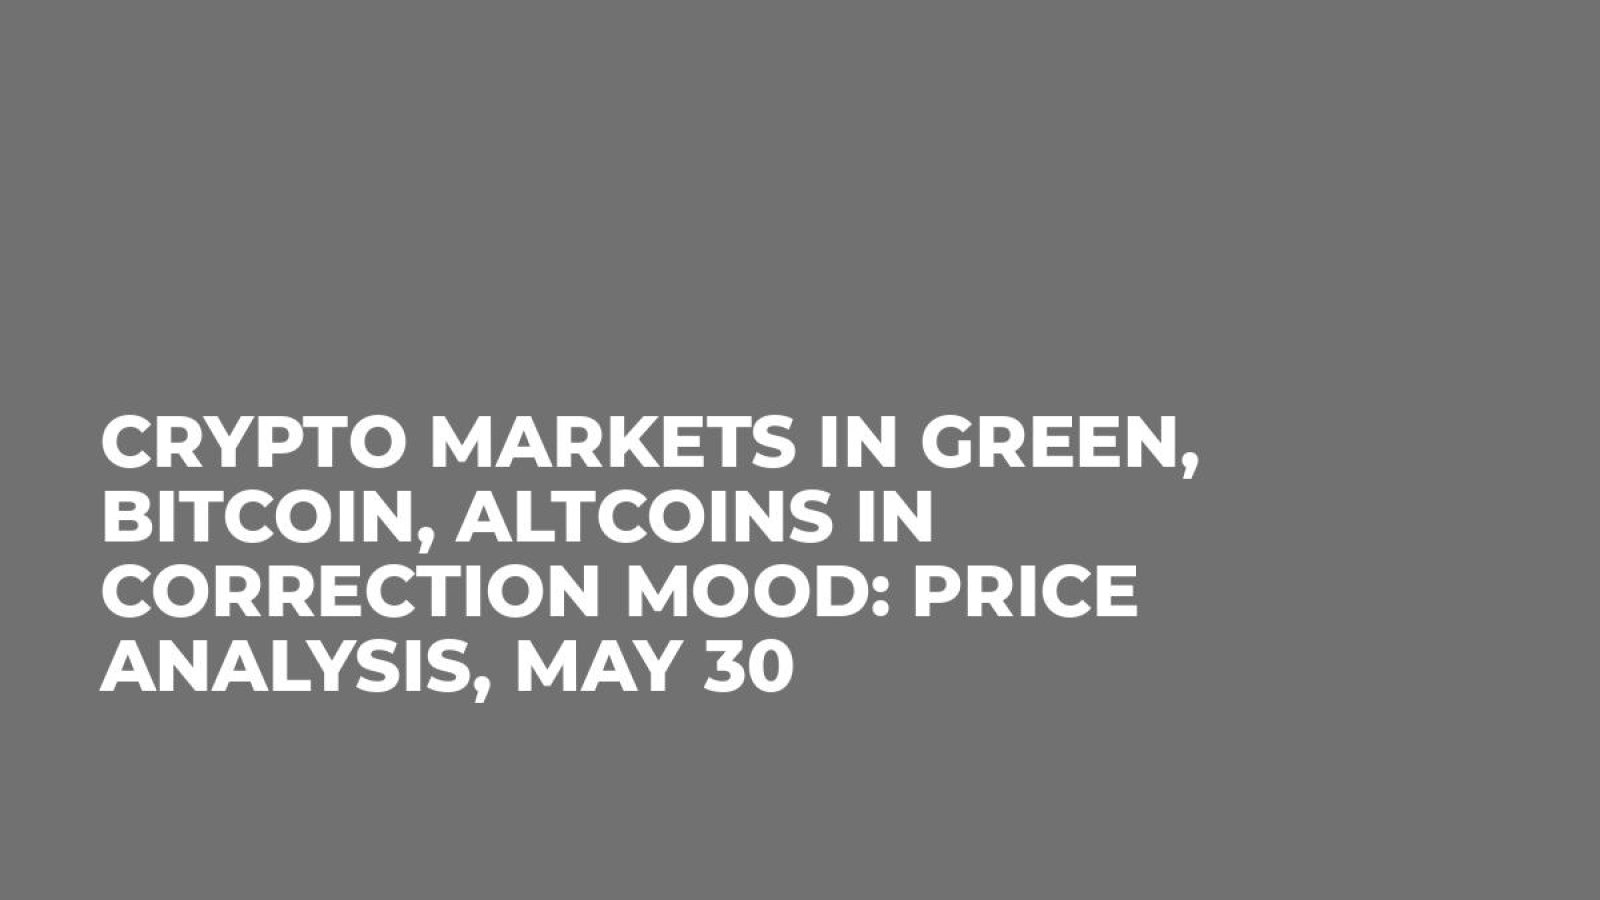 Crypto Markets in Green, Bitcoin, Altcoins in Correction Mood: Price Analysis, May 30